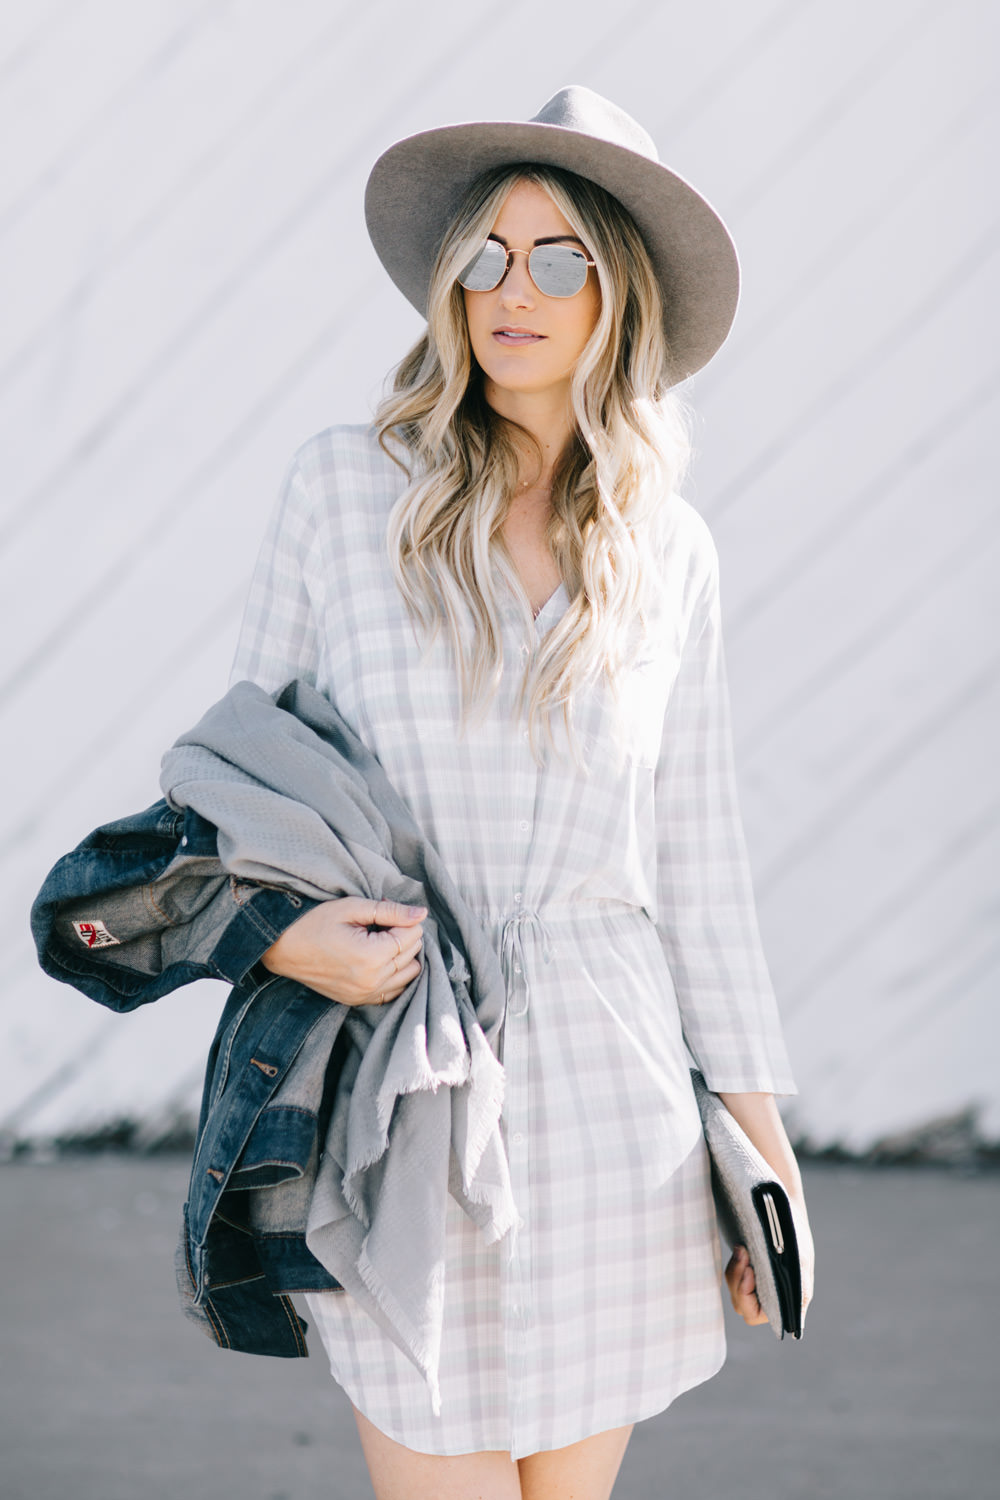 Dash of Darling shares an affordable spring outfit with ThredUp